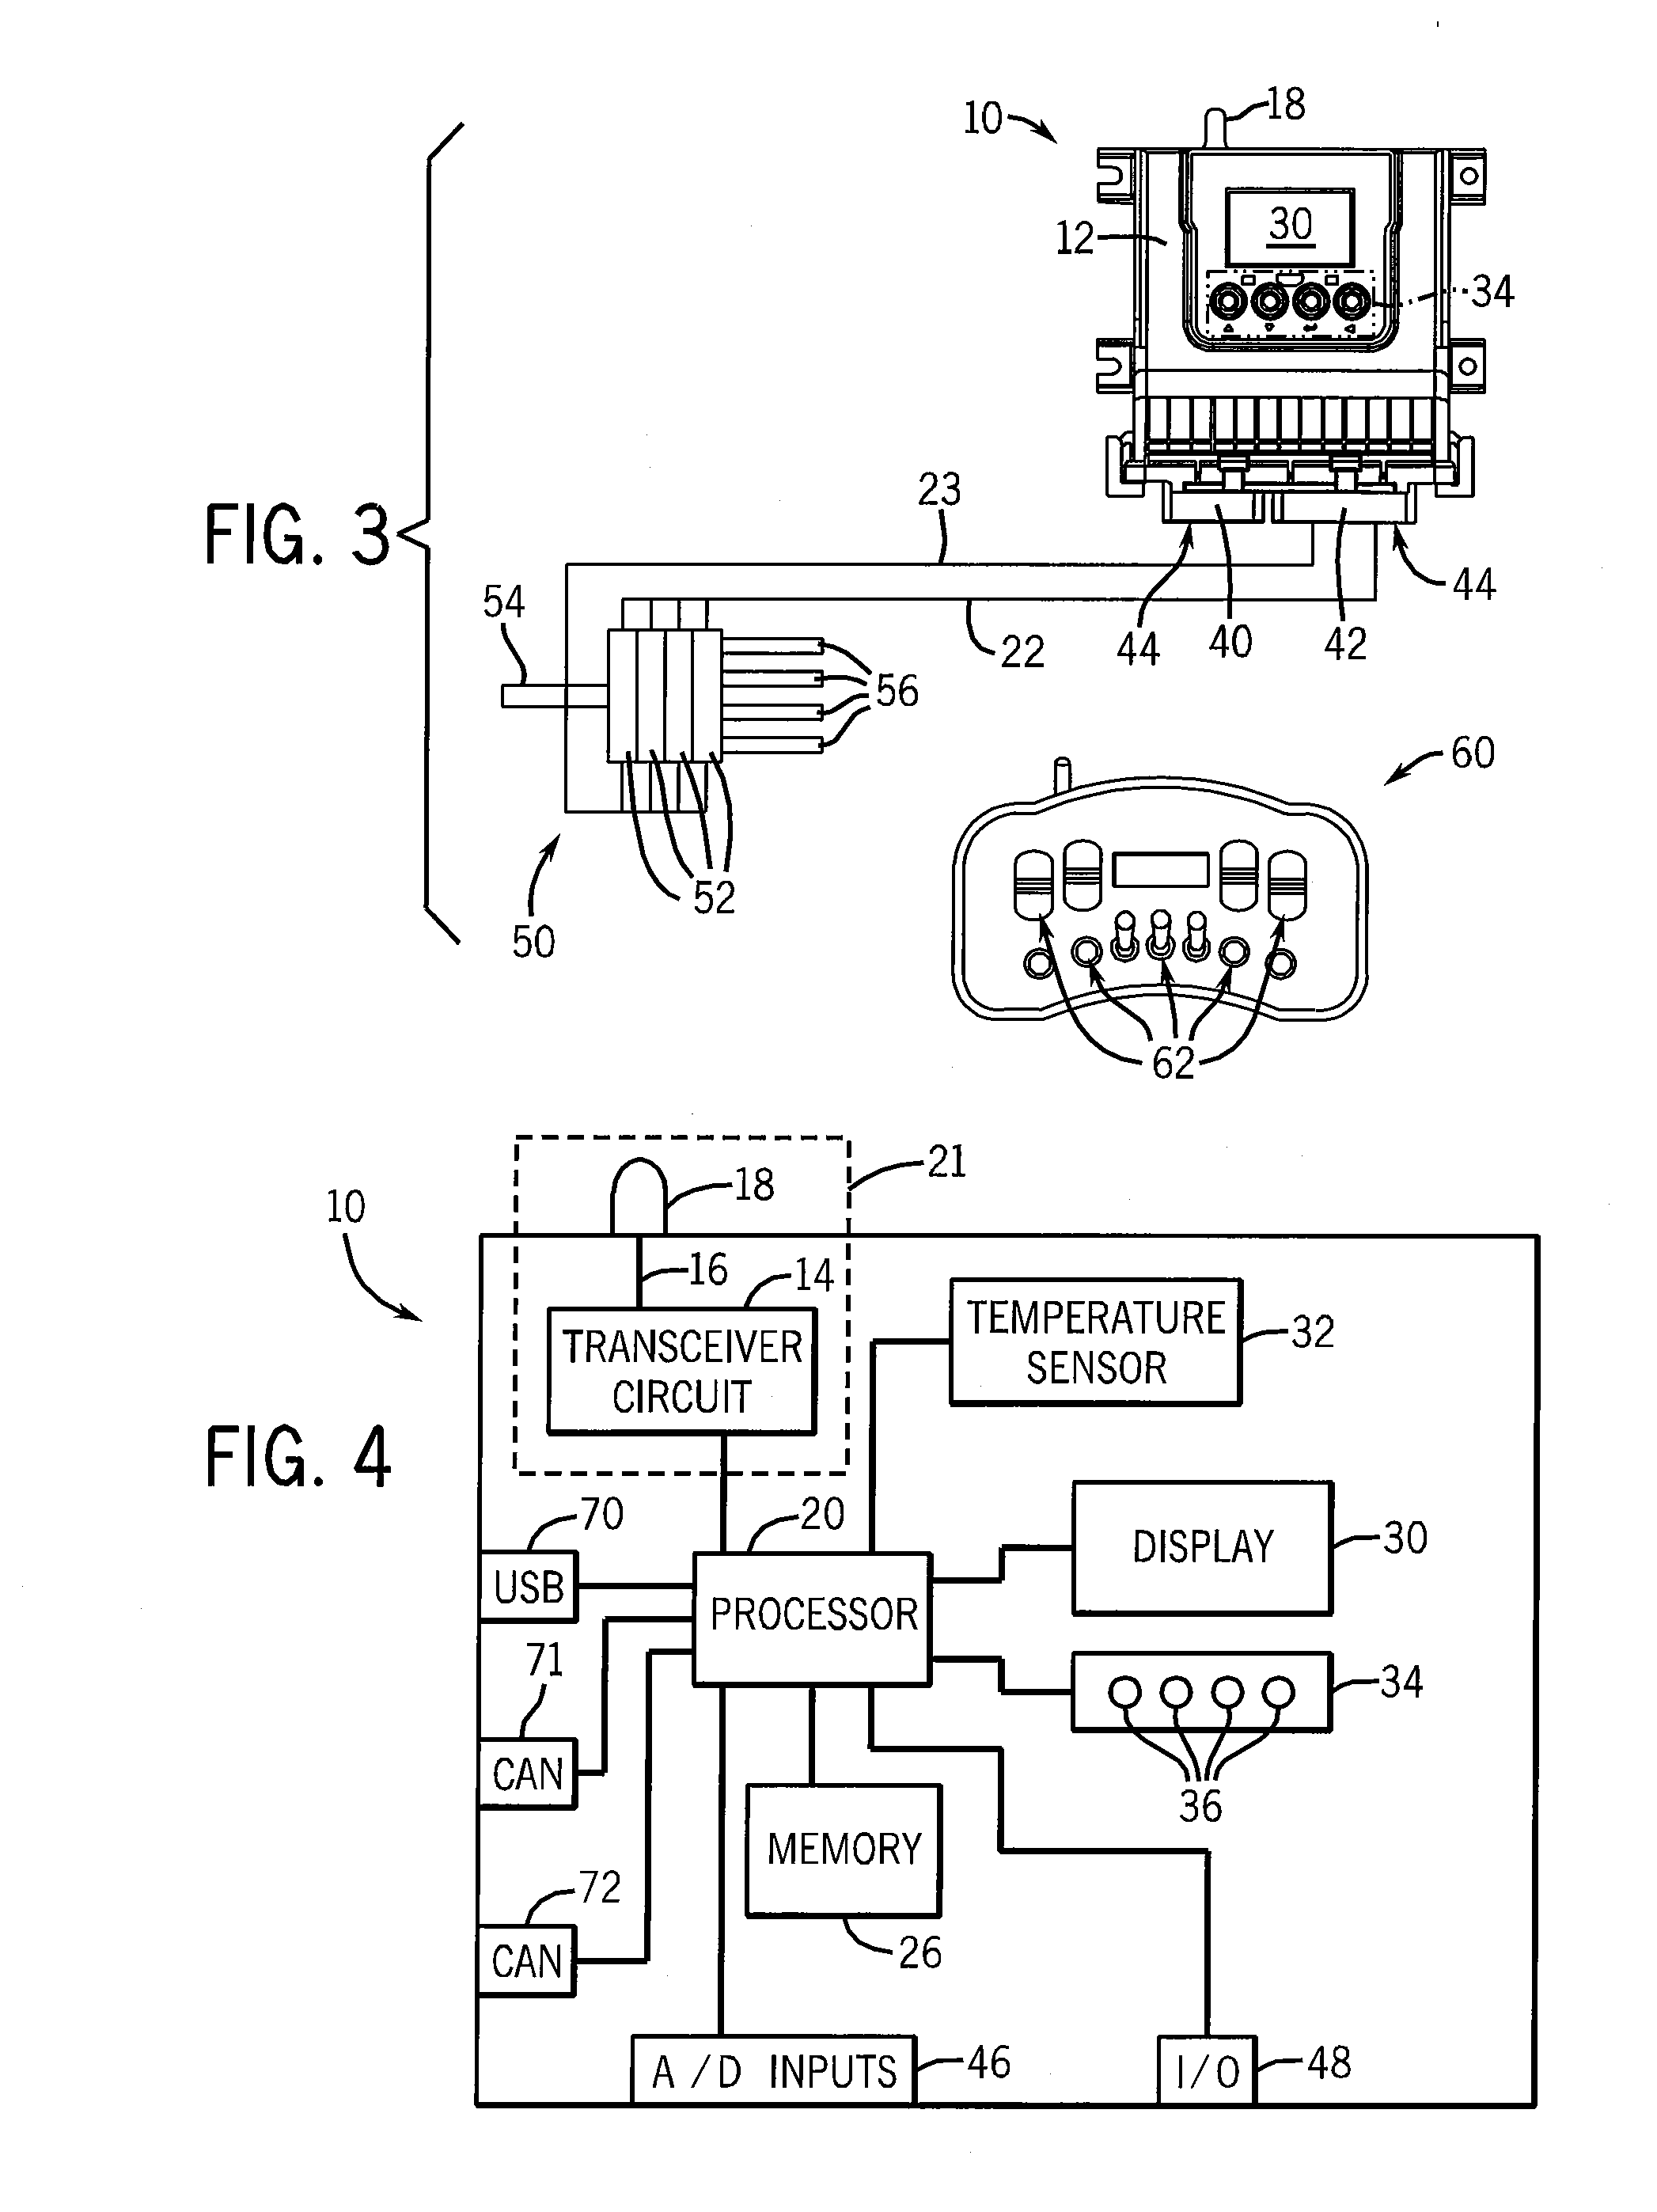 System for Control of Mobile Hydraulic Equipment